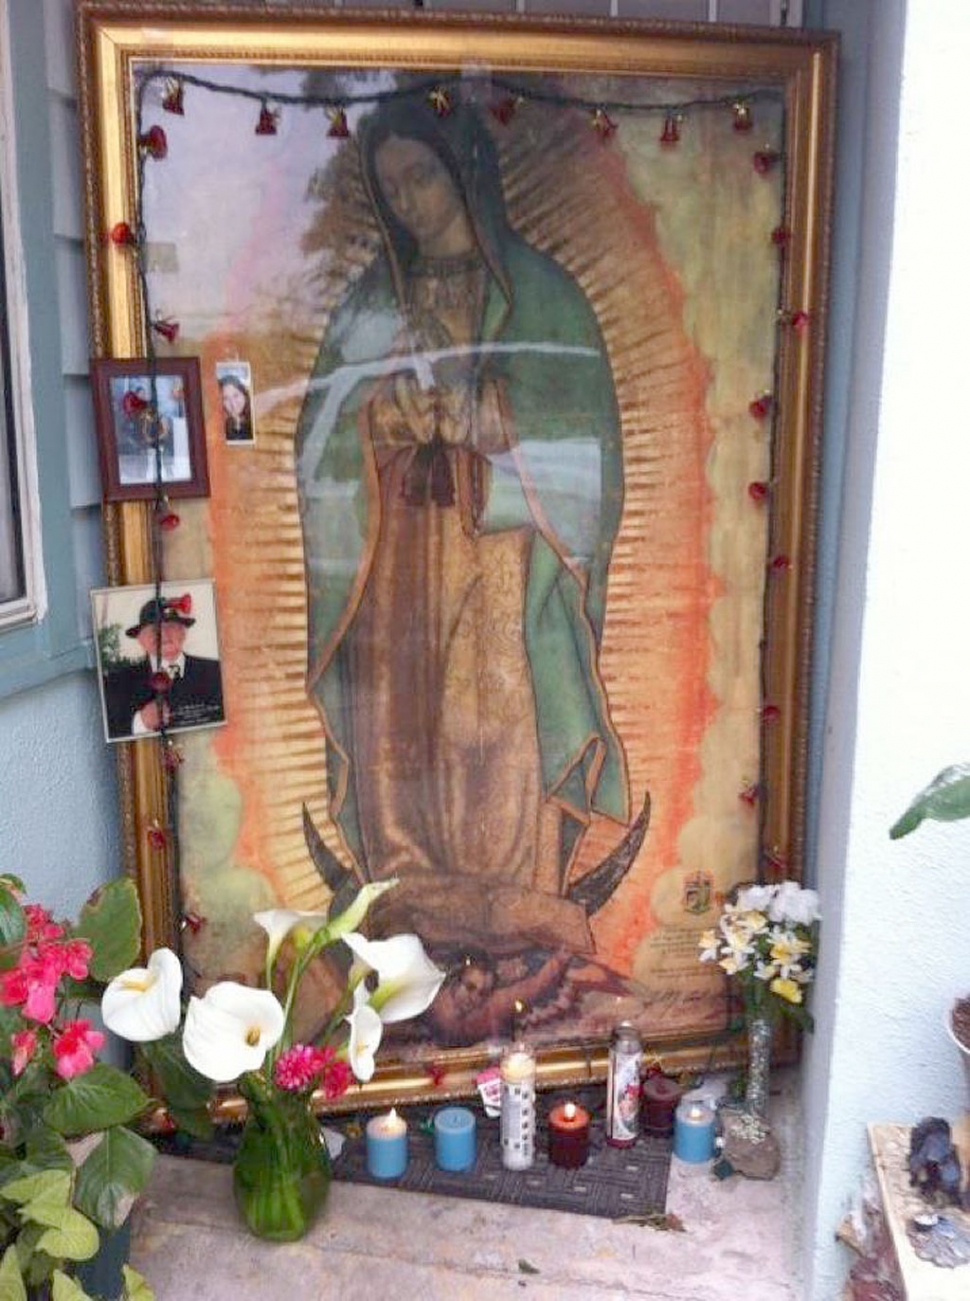 A memorial to Angela Perez who died of stab wounds Friday is displayed on her front porch.